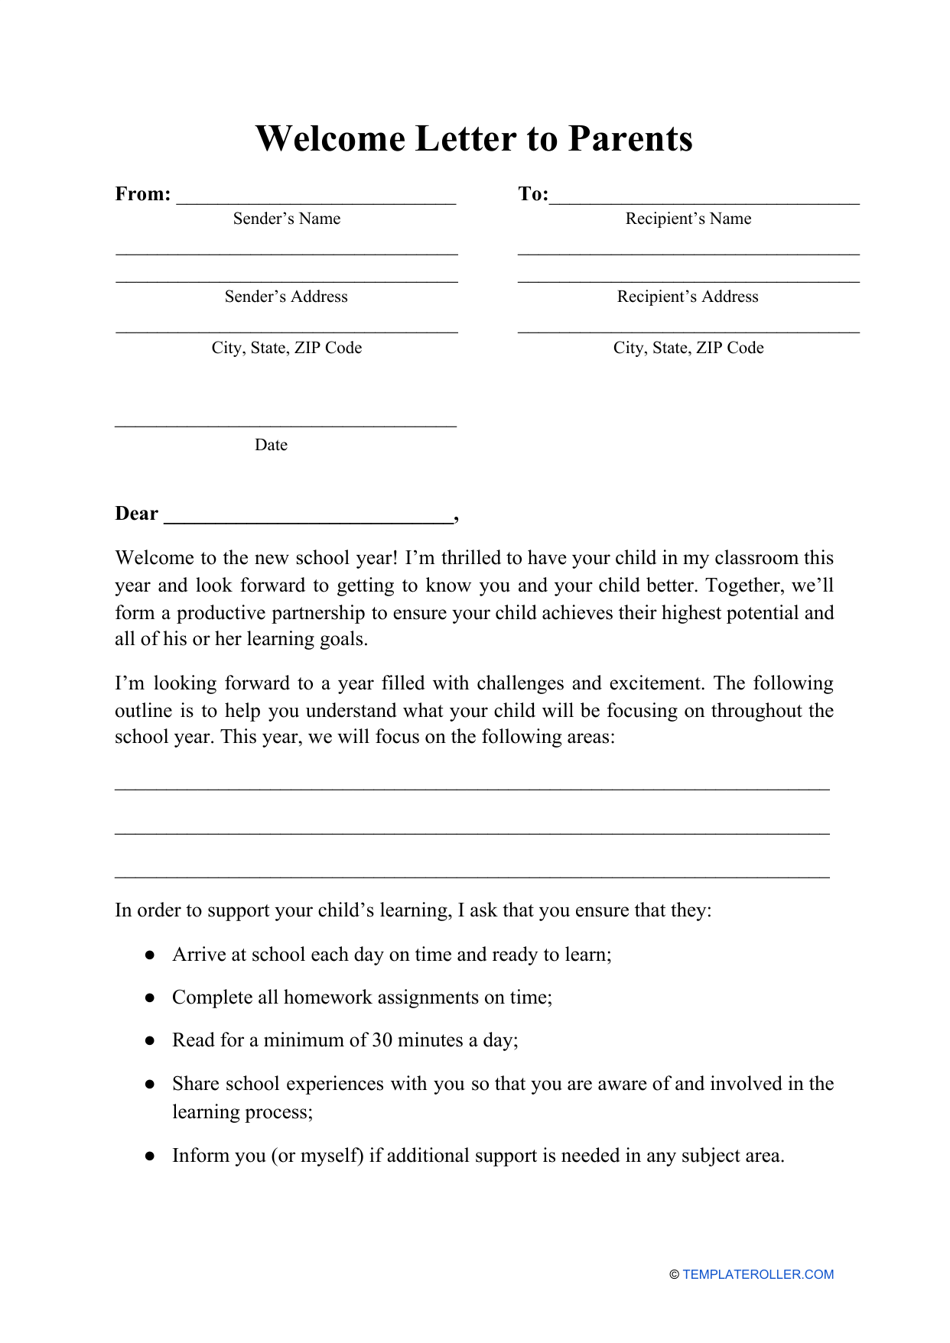 Welcome Letter to Parents Template Download Printable PDF In Letters To Parents From Teachers Templates